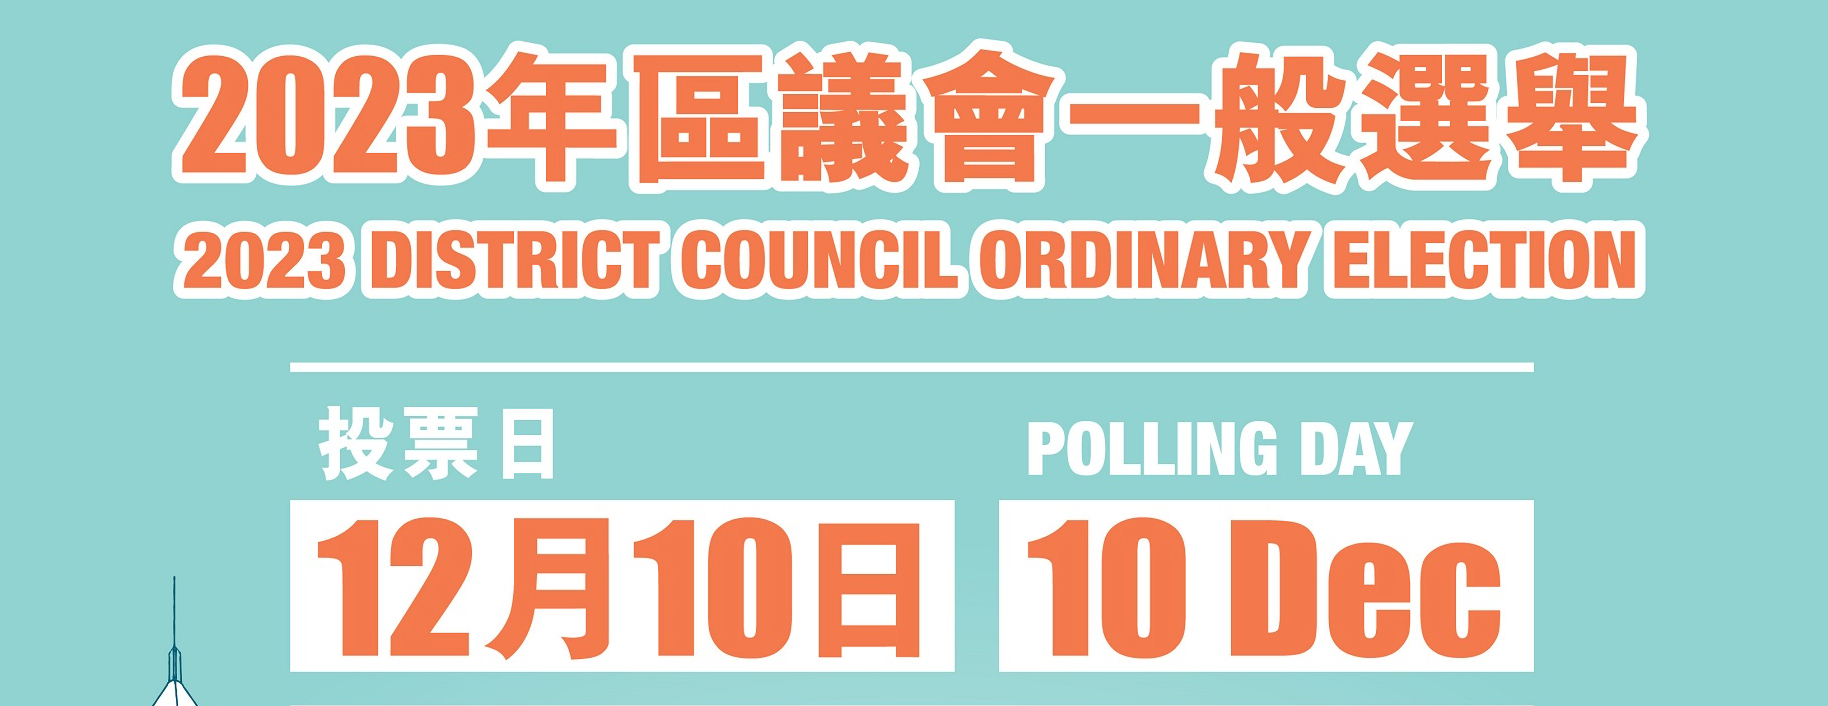 Voting in the 2023 Hong Kong district council election